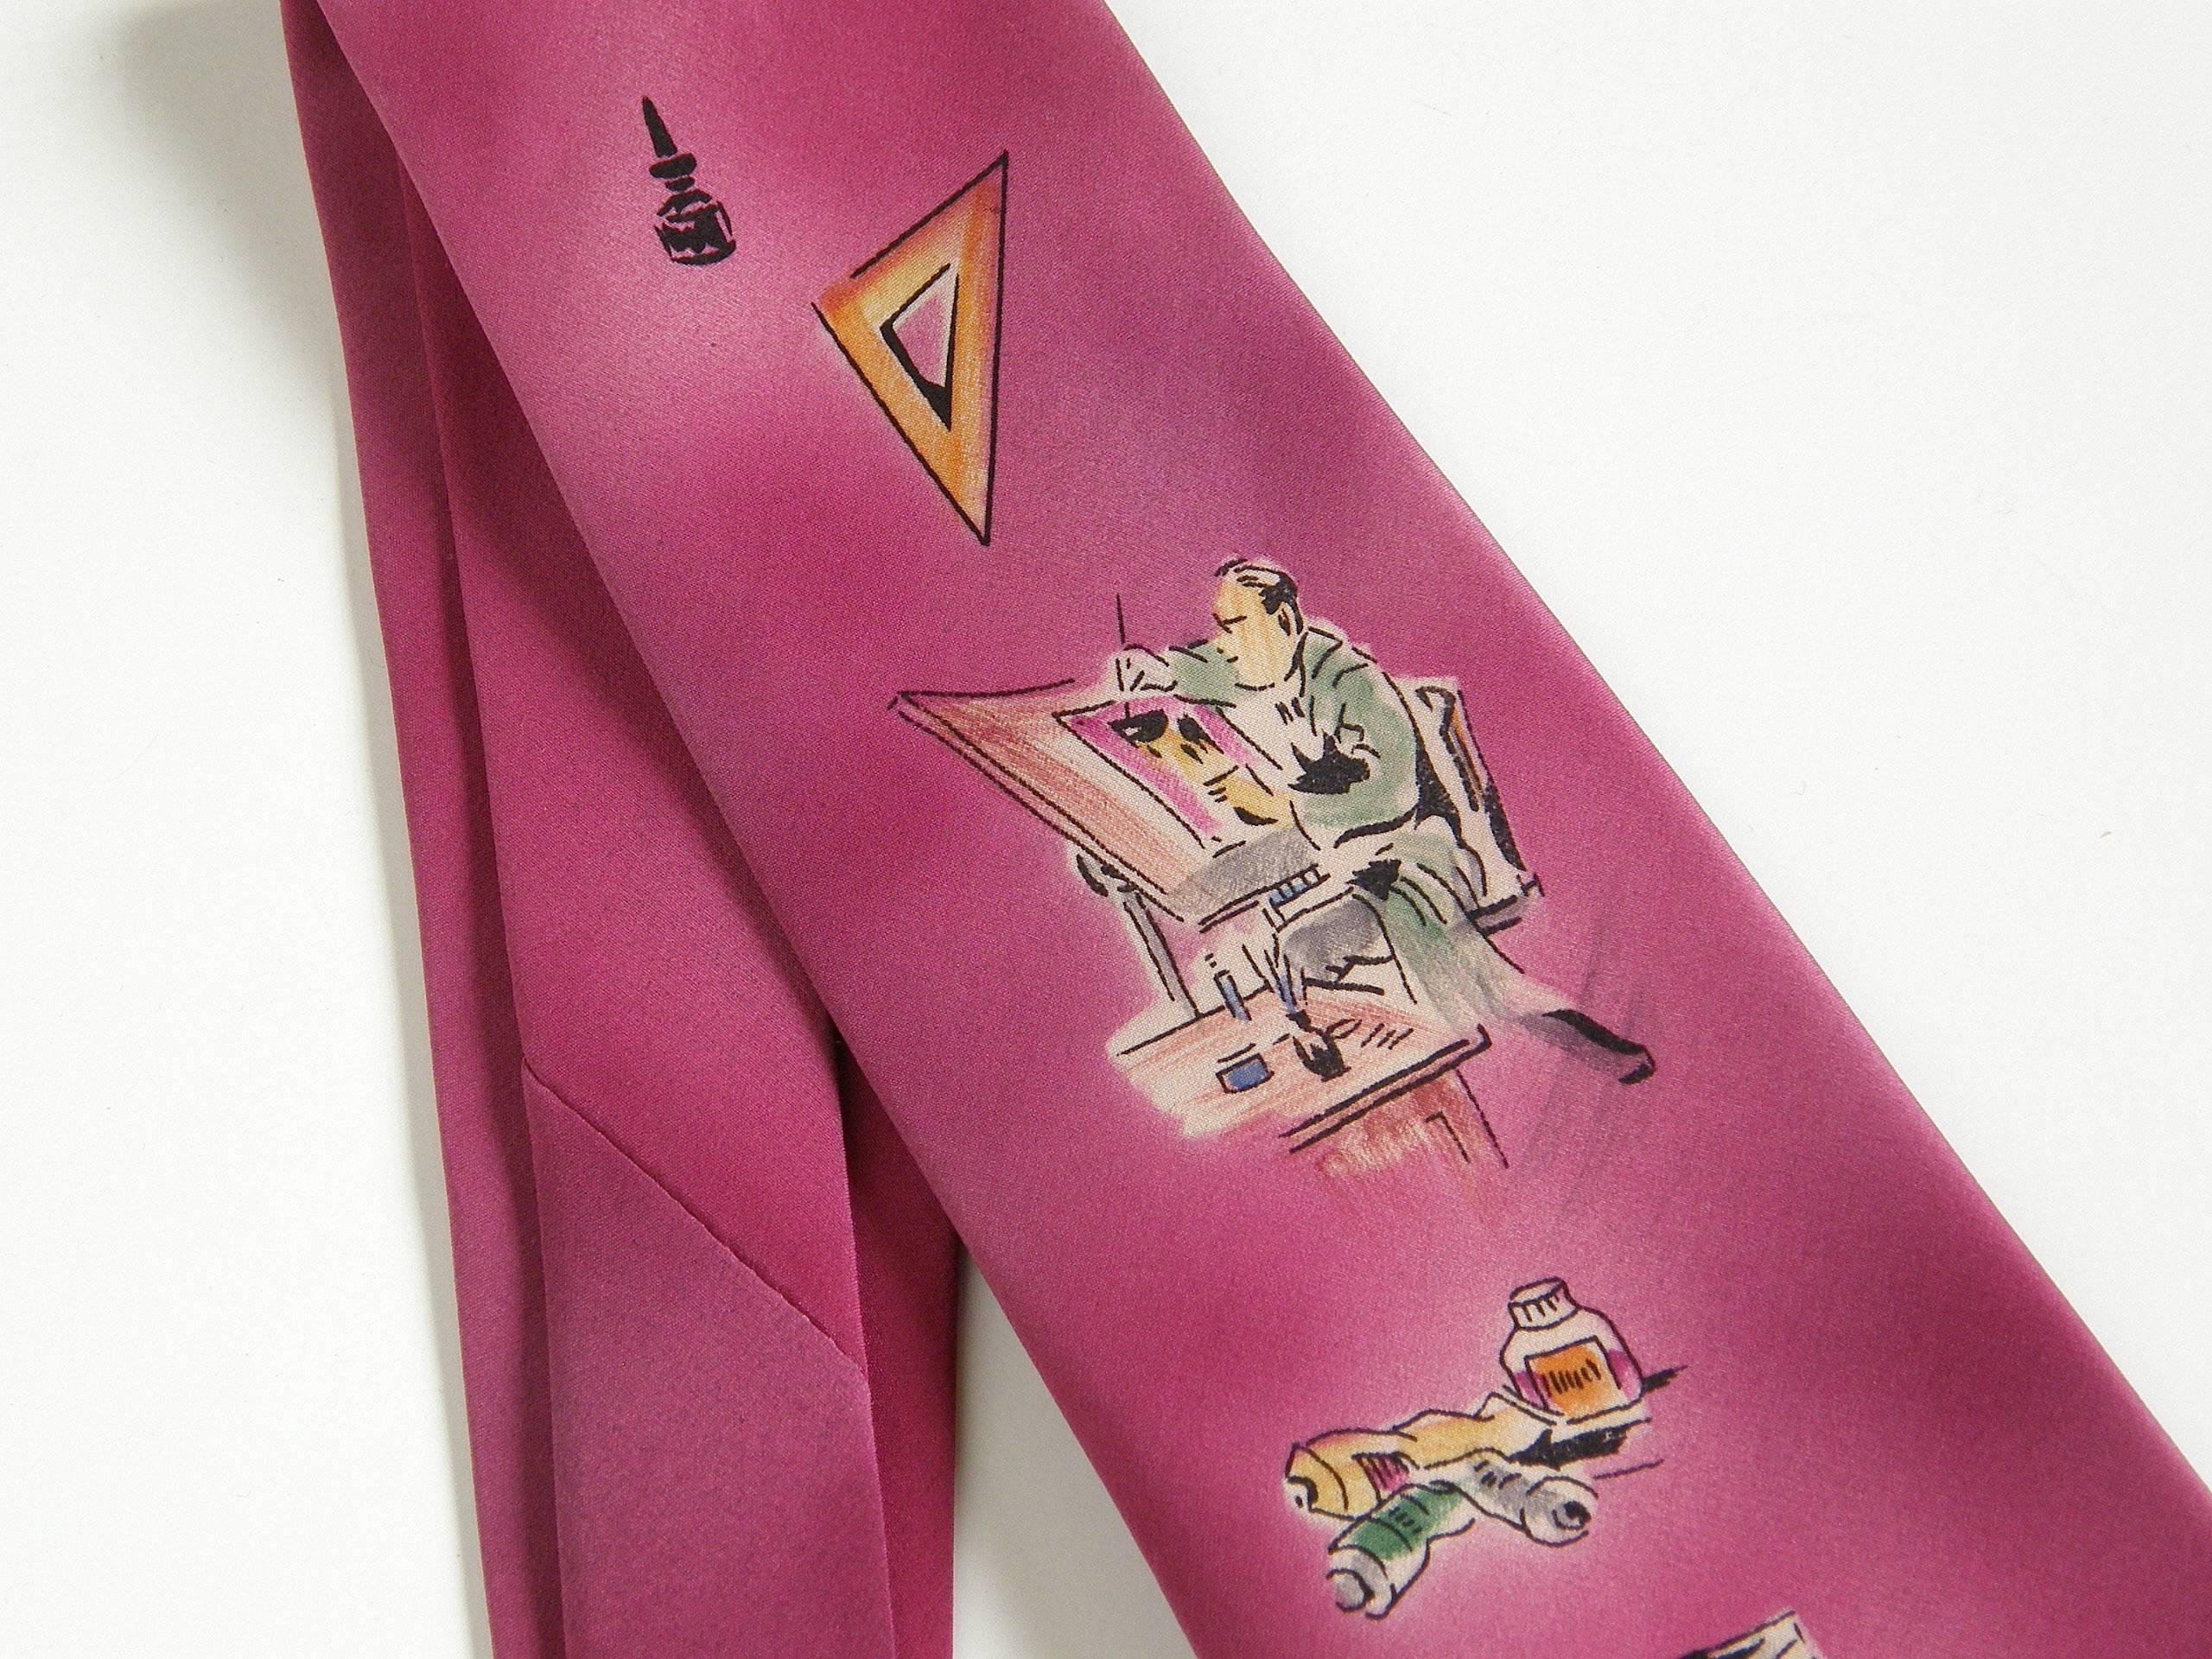 This wonderful, hand painted silk necktie features an image of an artist or designer at his drafting table. He is surrounded by the tools of his trade, including paints, ink, brushes and squares. The background is airbrushed in fuchsia and magenta